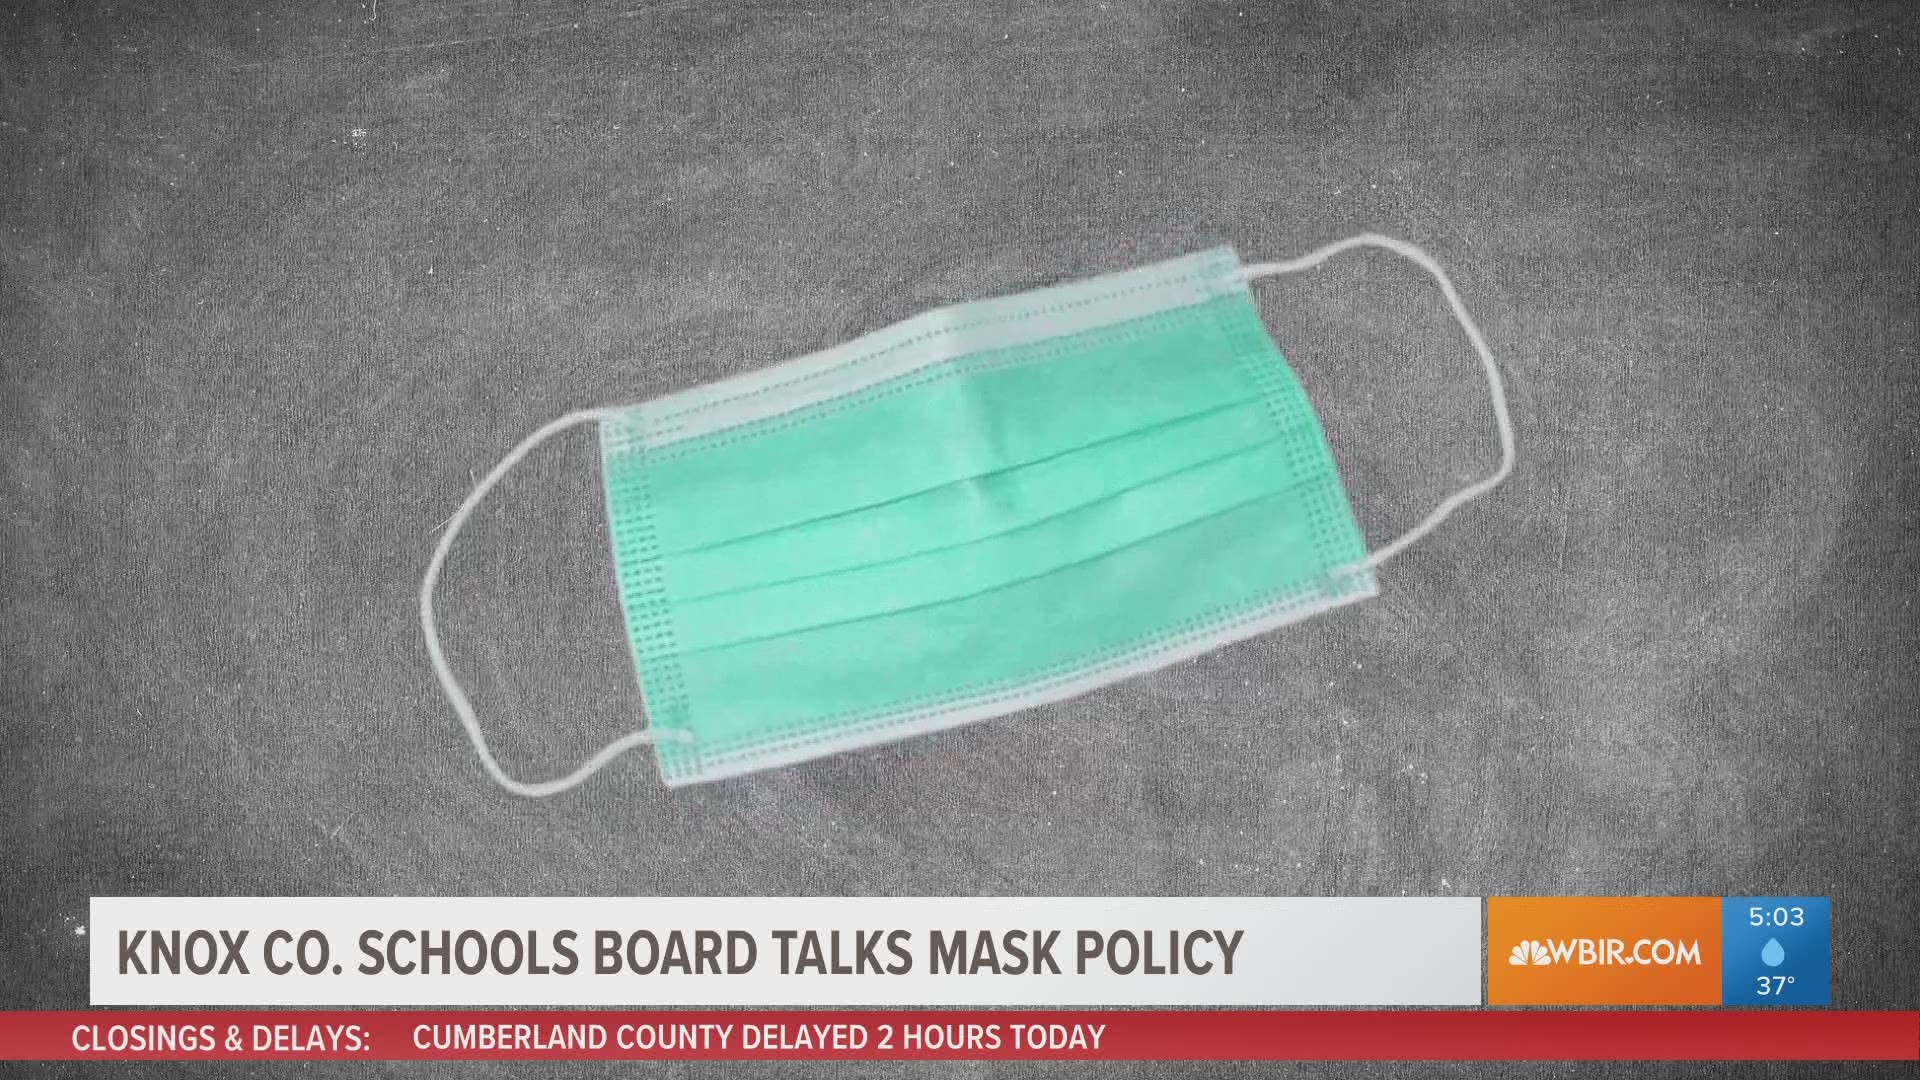 This morning, there is no change to Knox County schools' mask policy.